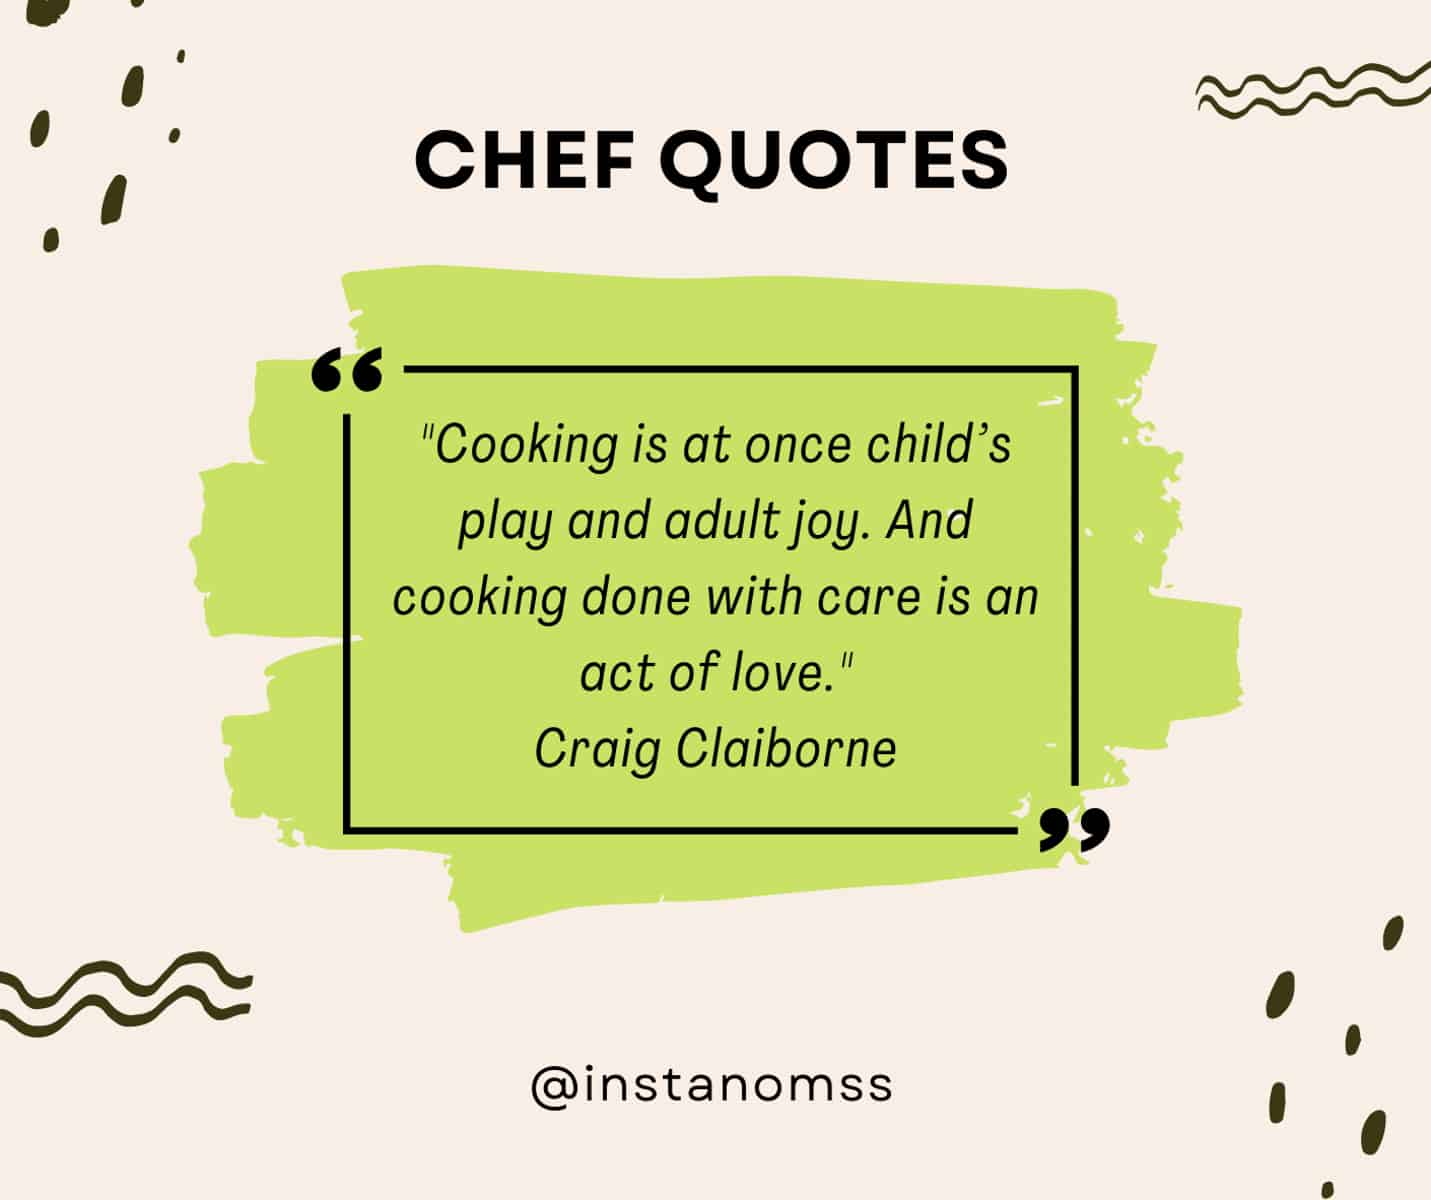 "Cooking is at once child’s play and adult joy. And cooking done with care is an act of love." Craig Claiborne